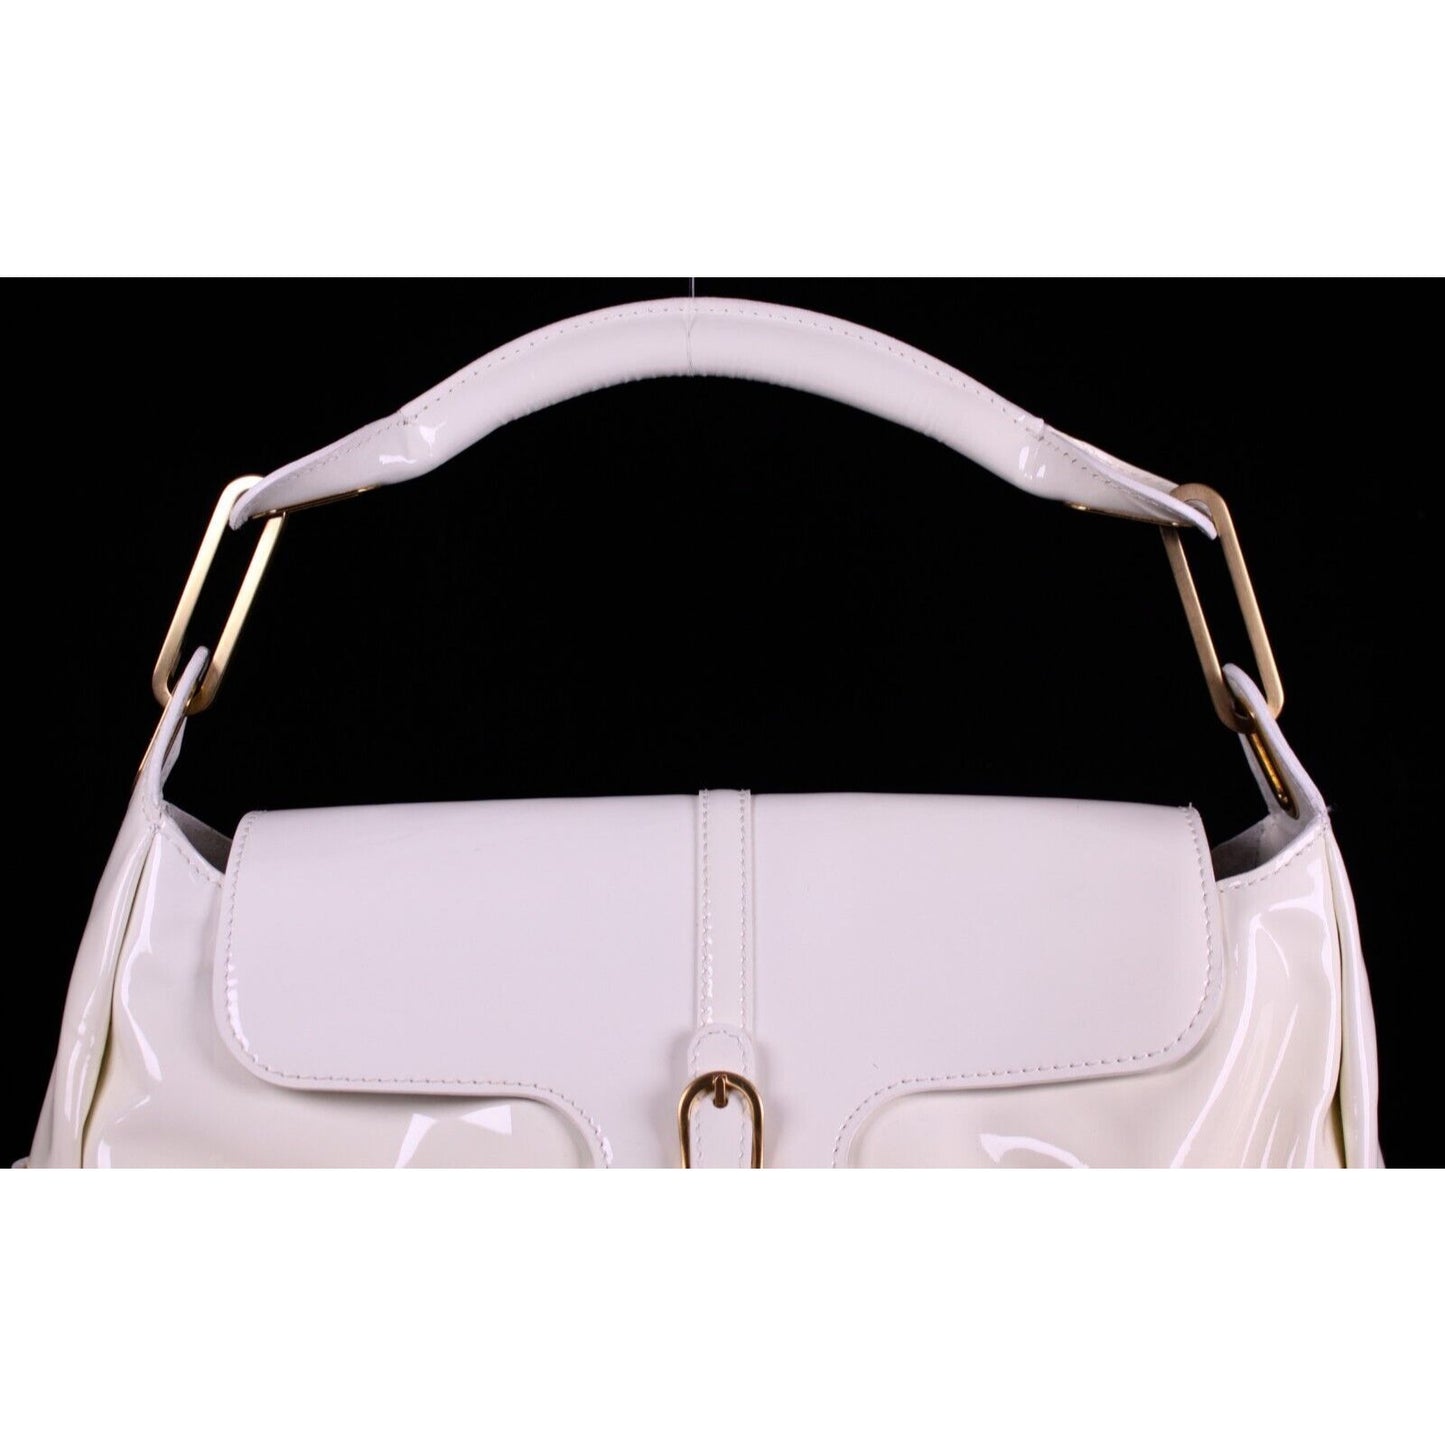 Jimmy Choo pale yellow glossy leather shoulder bag with gold hardware & belted sides